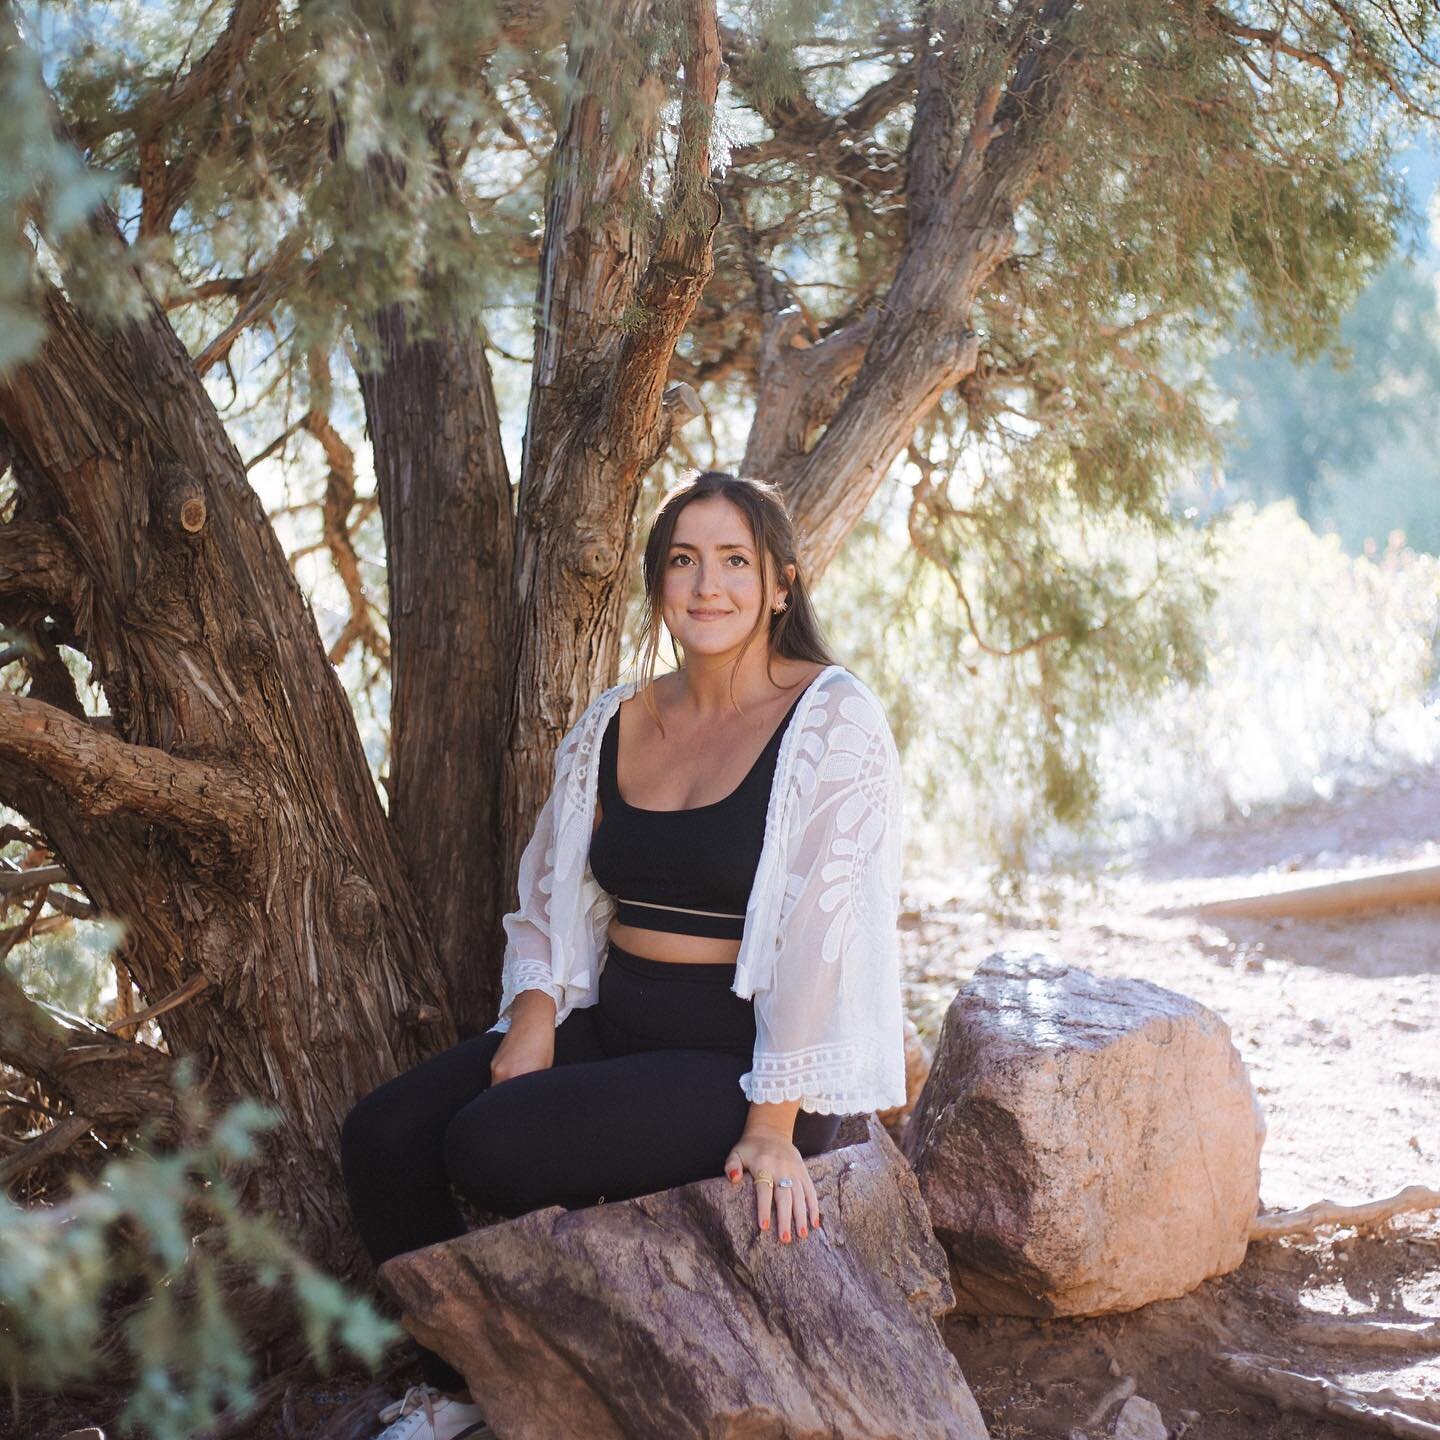 Meet Emma Poole!

Emma began teaching yoga professionally&nbsp;in 2013, a year after moving to New York to pursue a career in music and theatre. Although her path took a very different turn than she expected, she now believes it was always in alignme